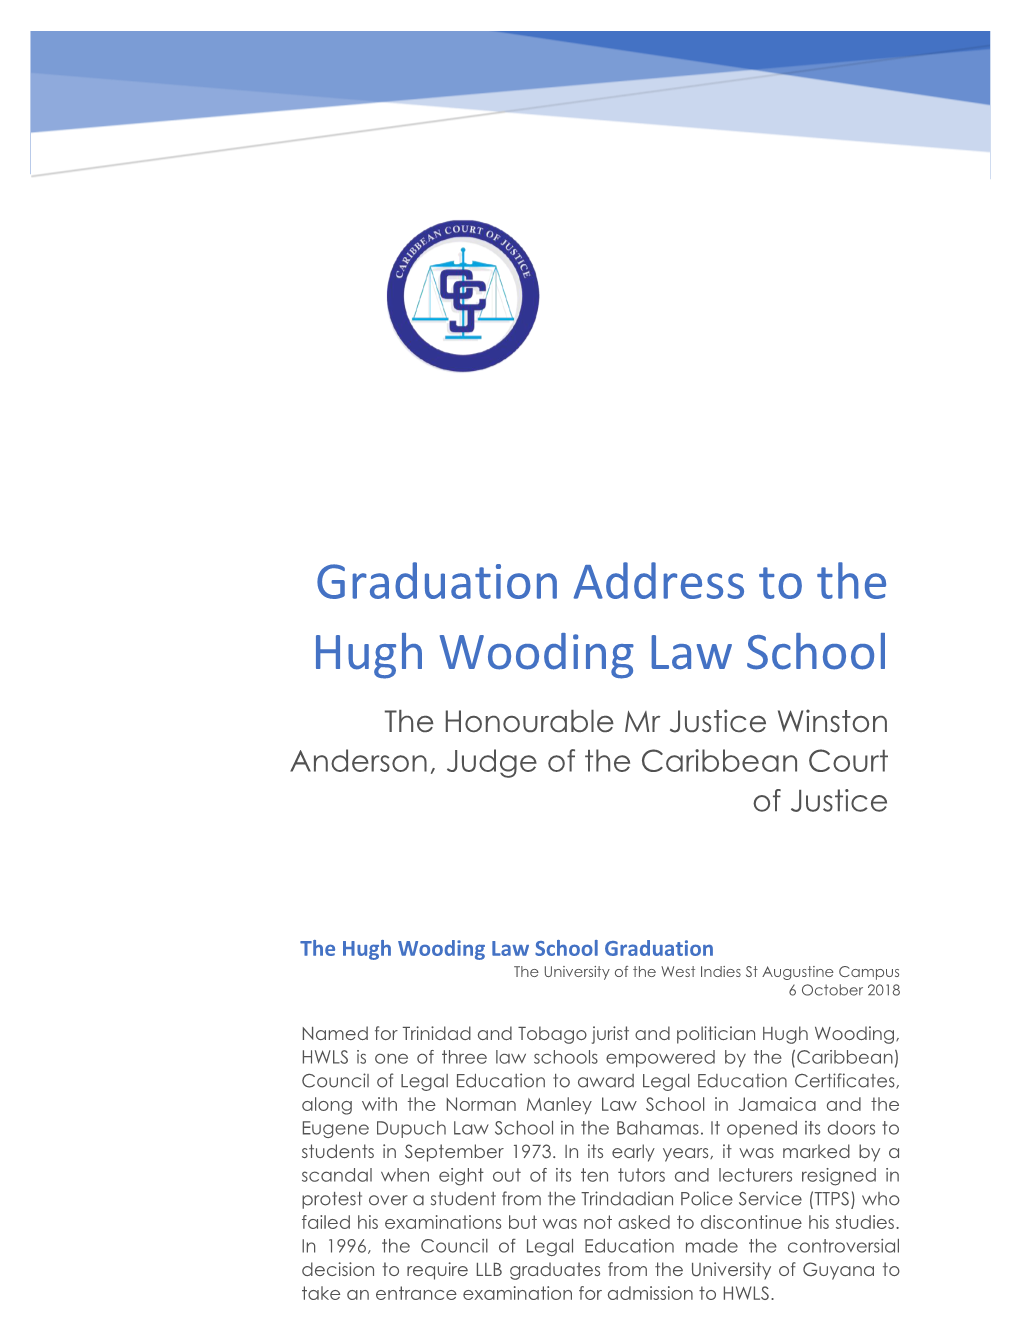 Graduation Address to the Hugh Wooding Law School the Honourable Mr Justice Winston Anderson, Judge of the Caribbean Court of Justice